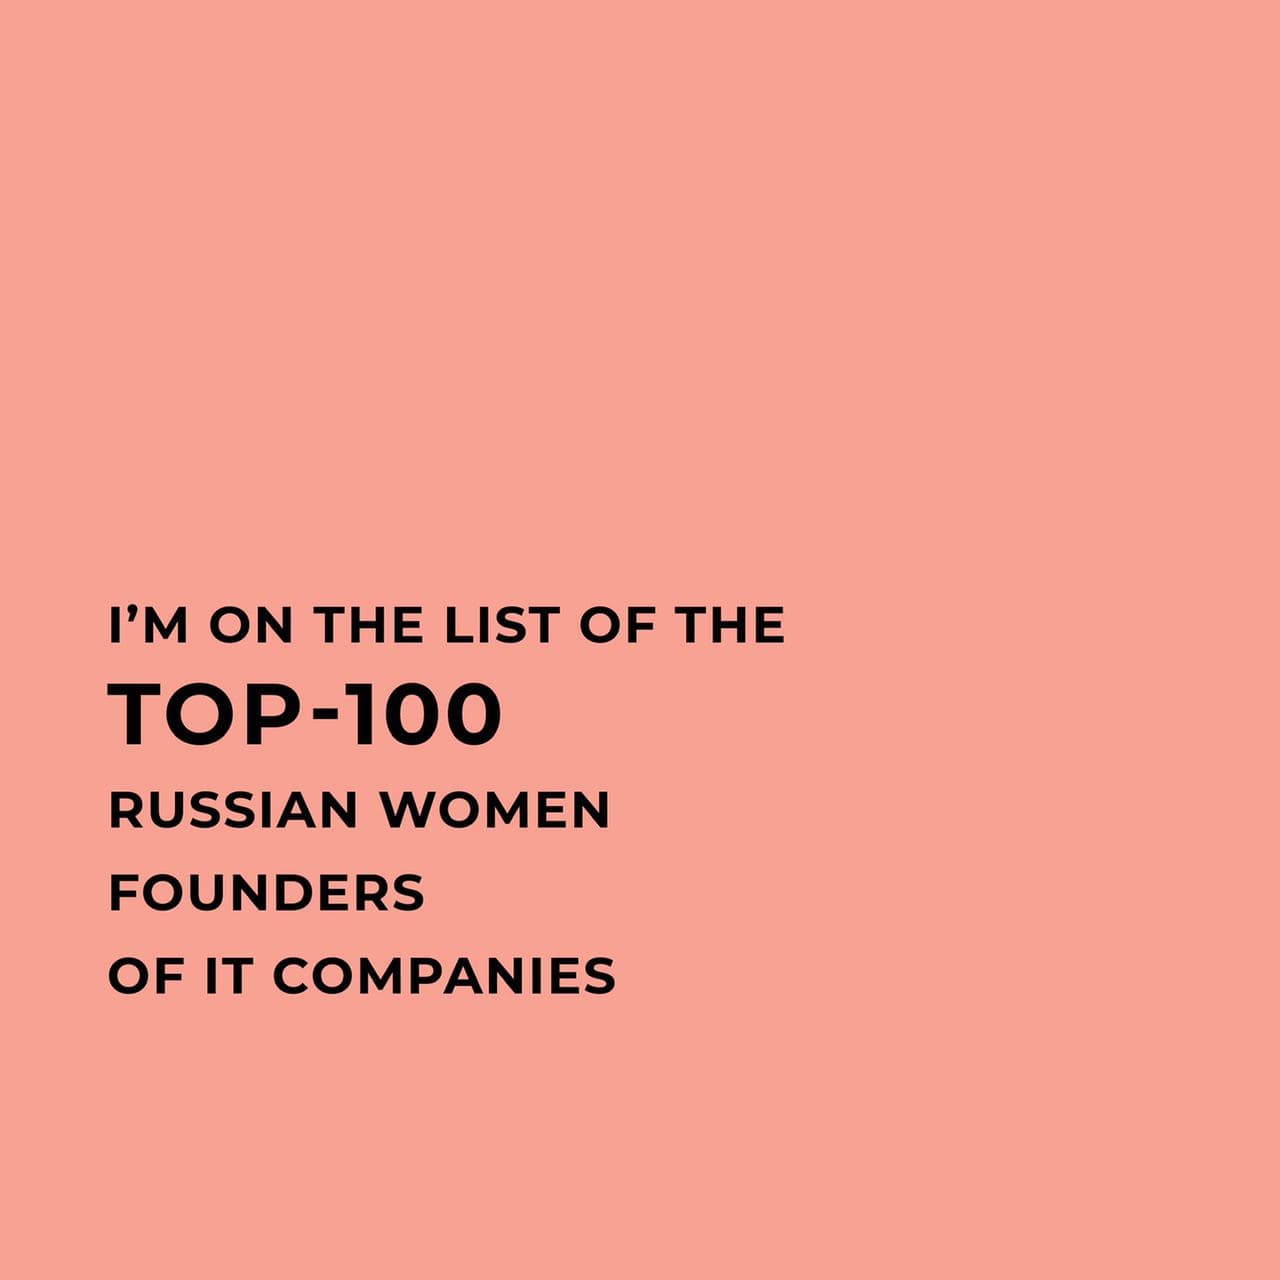 I’M ON THE LIST OF THE TOP-100 RUSSIAN WOMEN FOUNDERS OF IT COMPANIES!